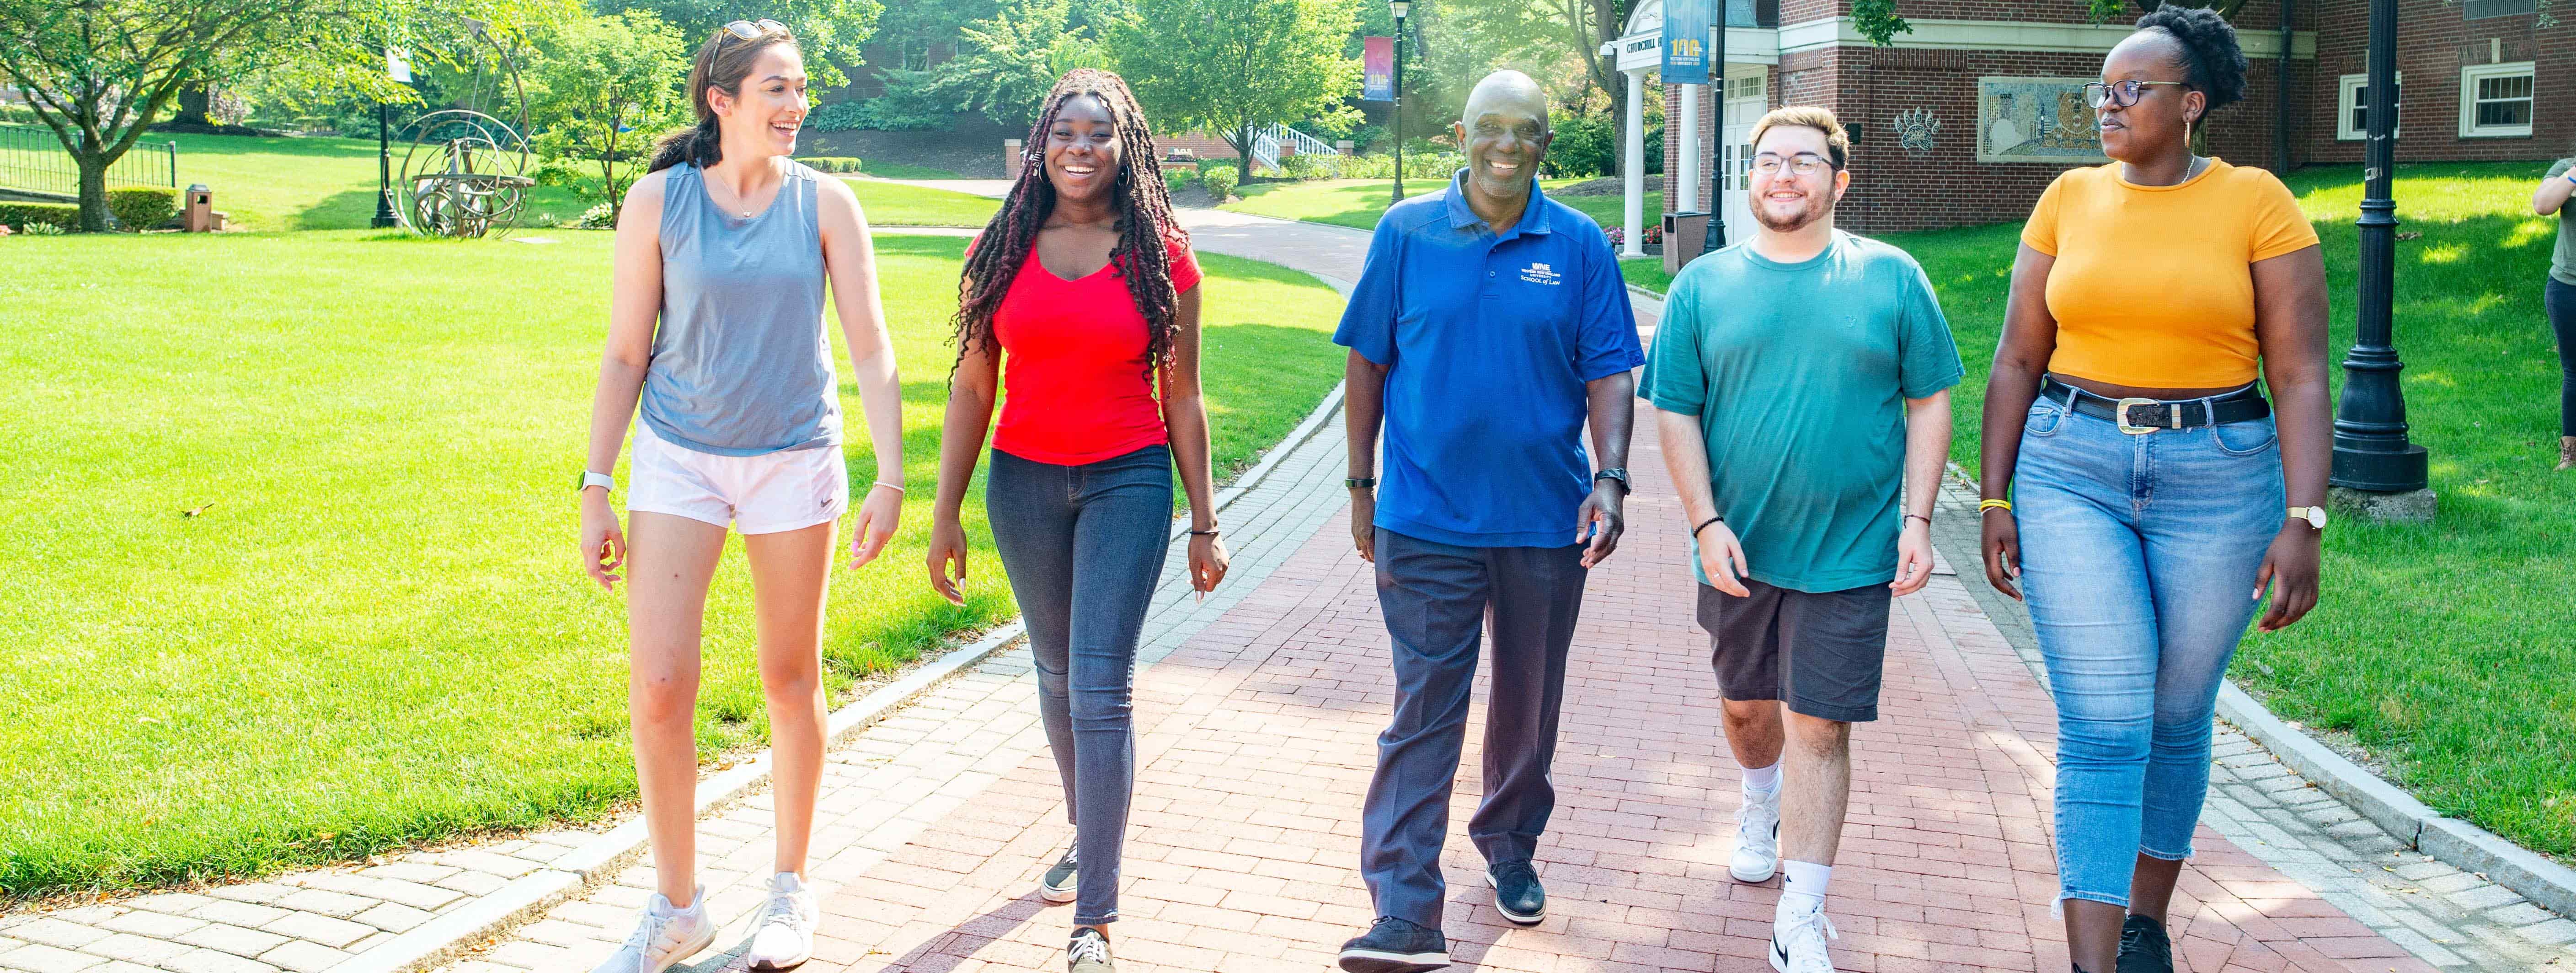 Dr. Johnson walking with students on campus